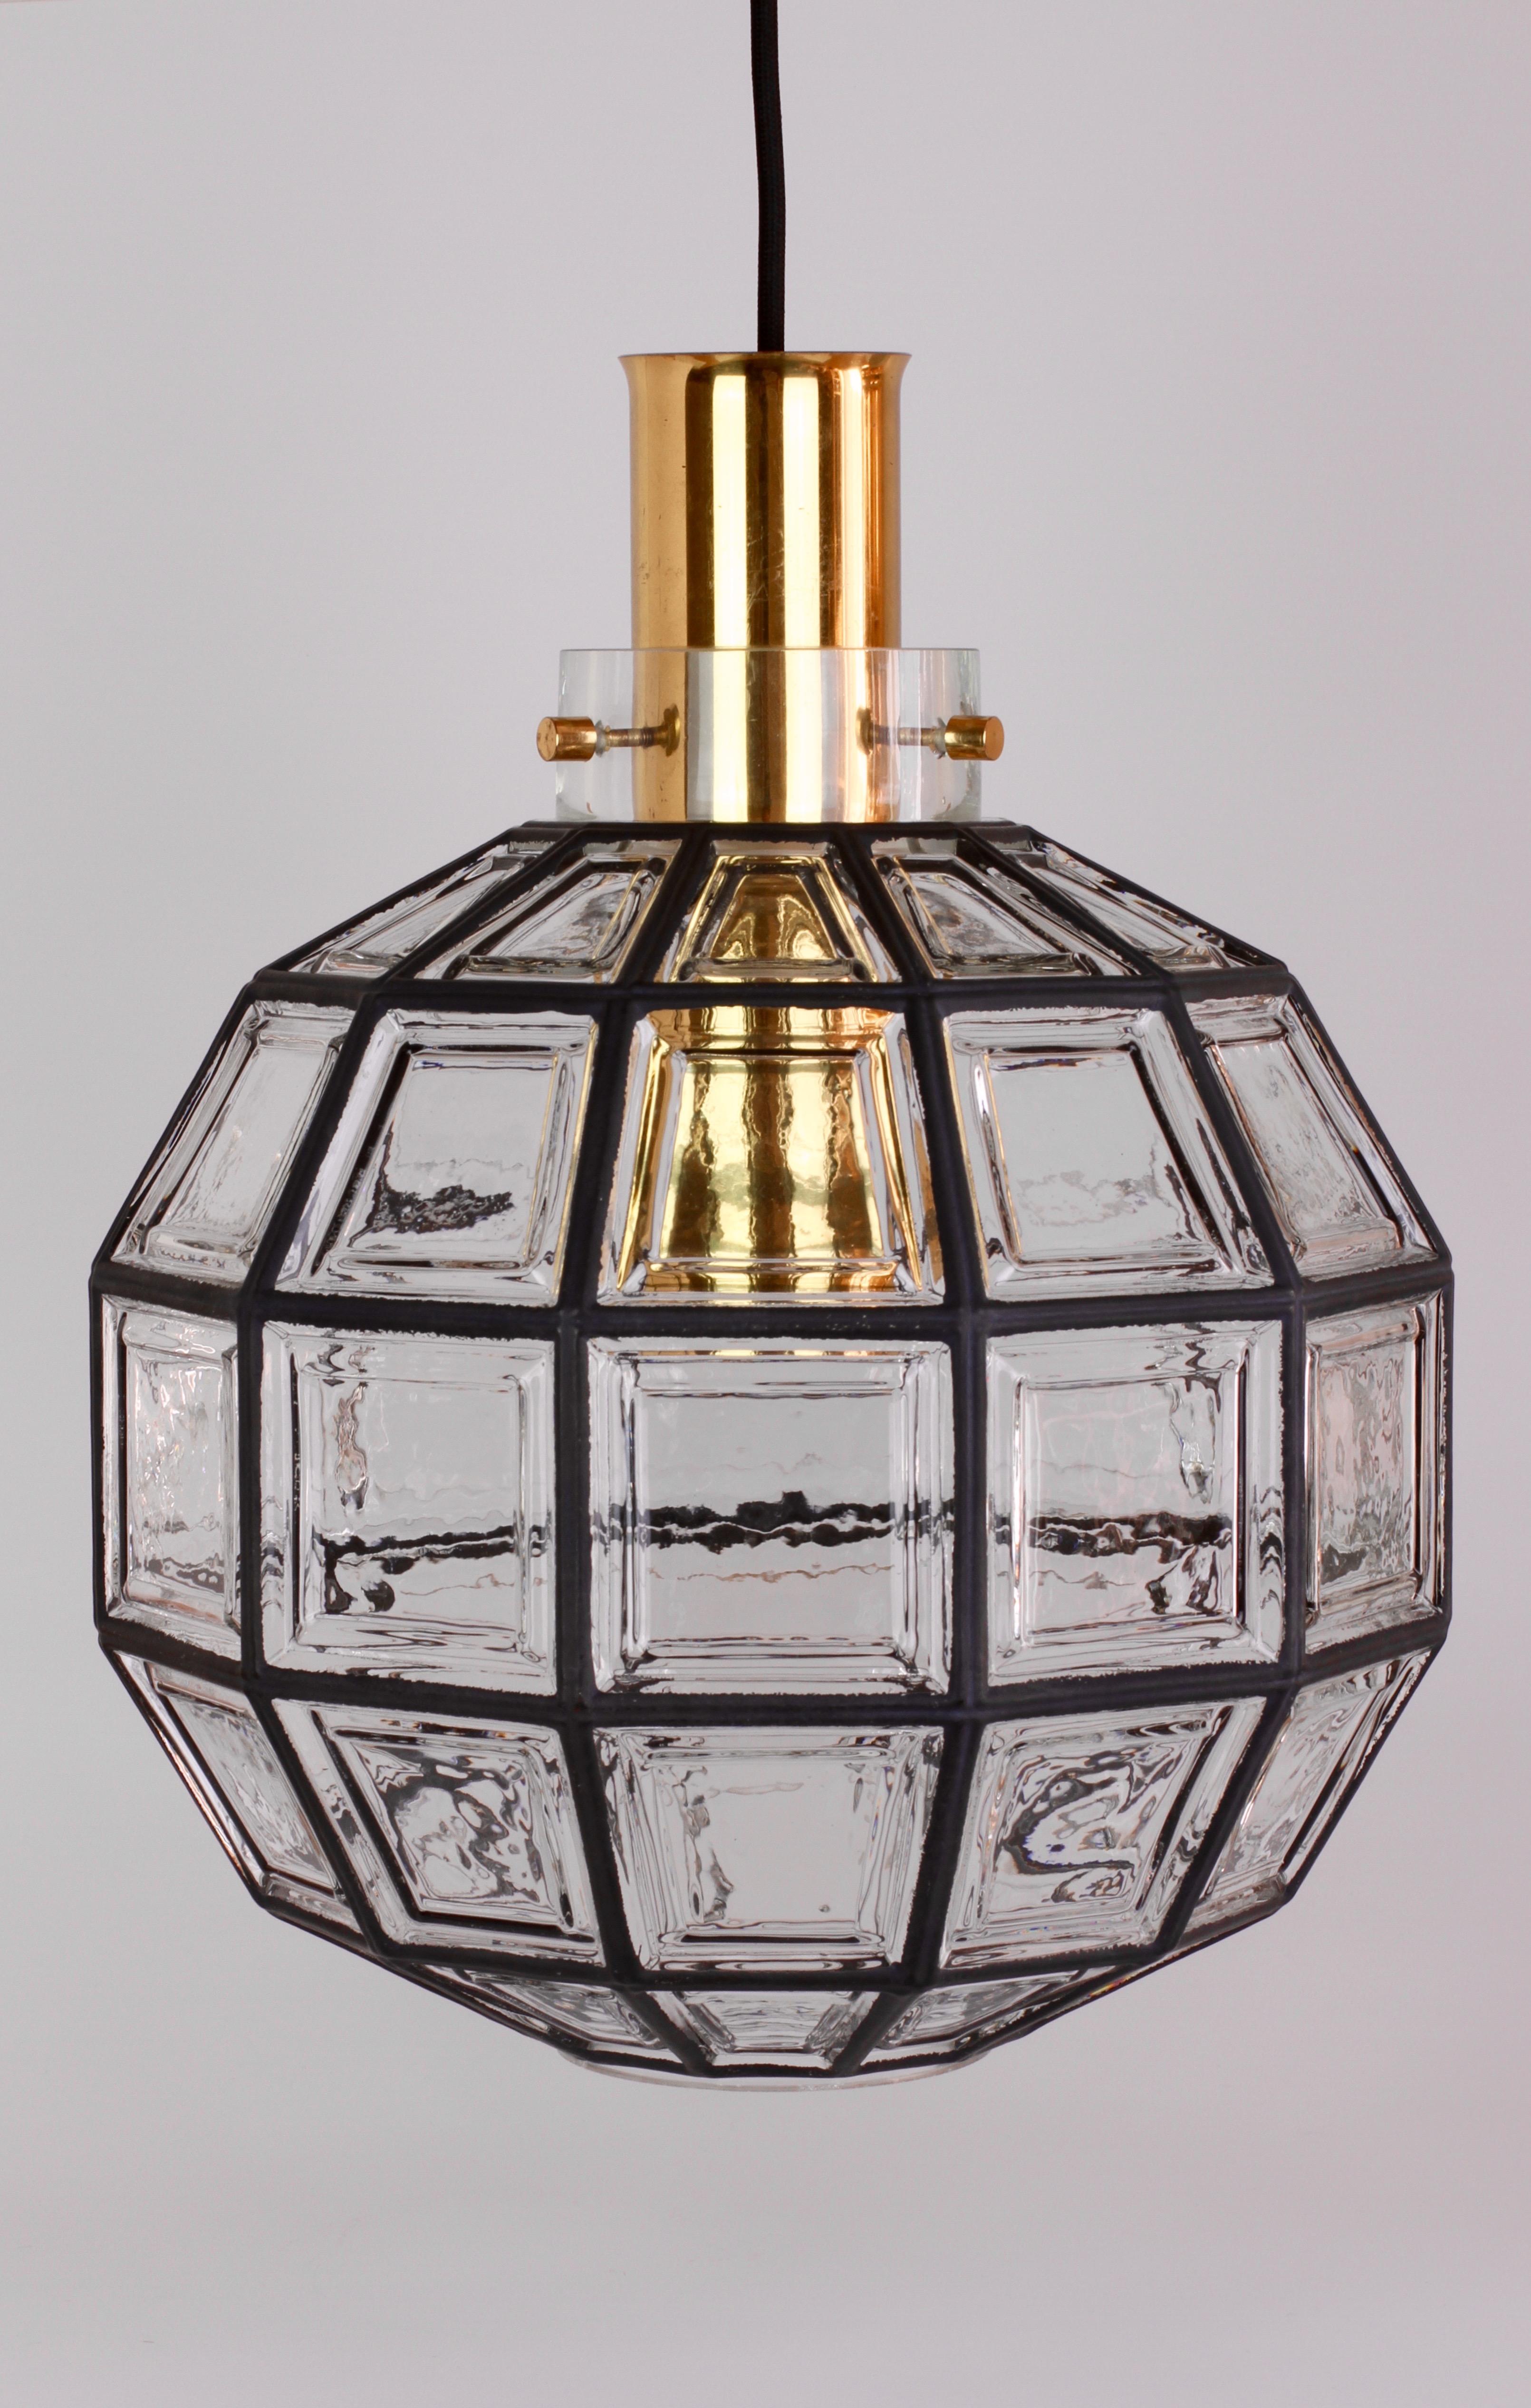 One of a set of three refurbished, beautifully designed and crafted, octagonally shaped and multi-faceted clear glass and brass midcentury pendant lights. These large minimalistic, Contemporary Art Deco lantern style lights were manufactured by